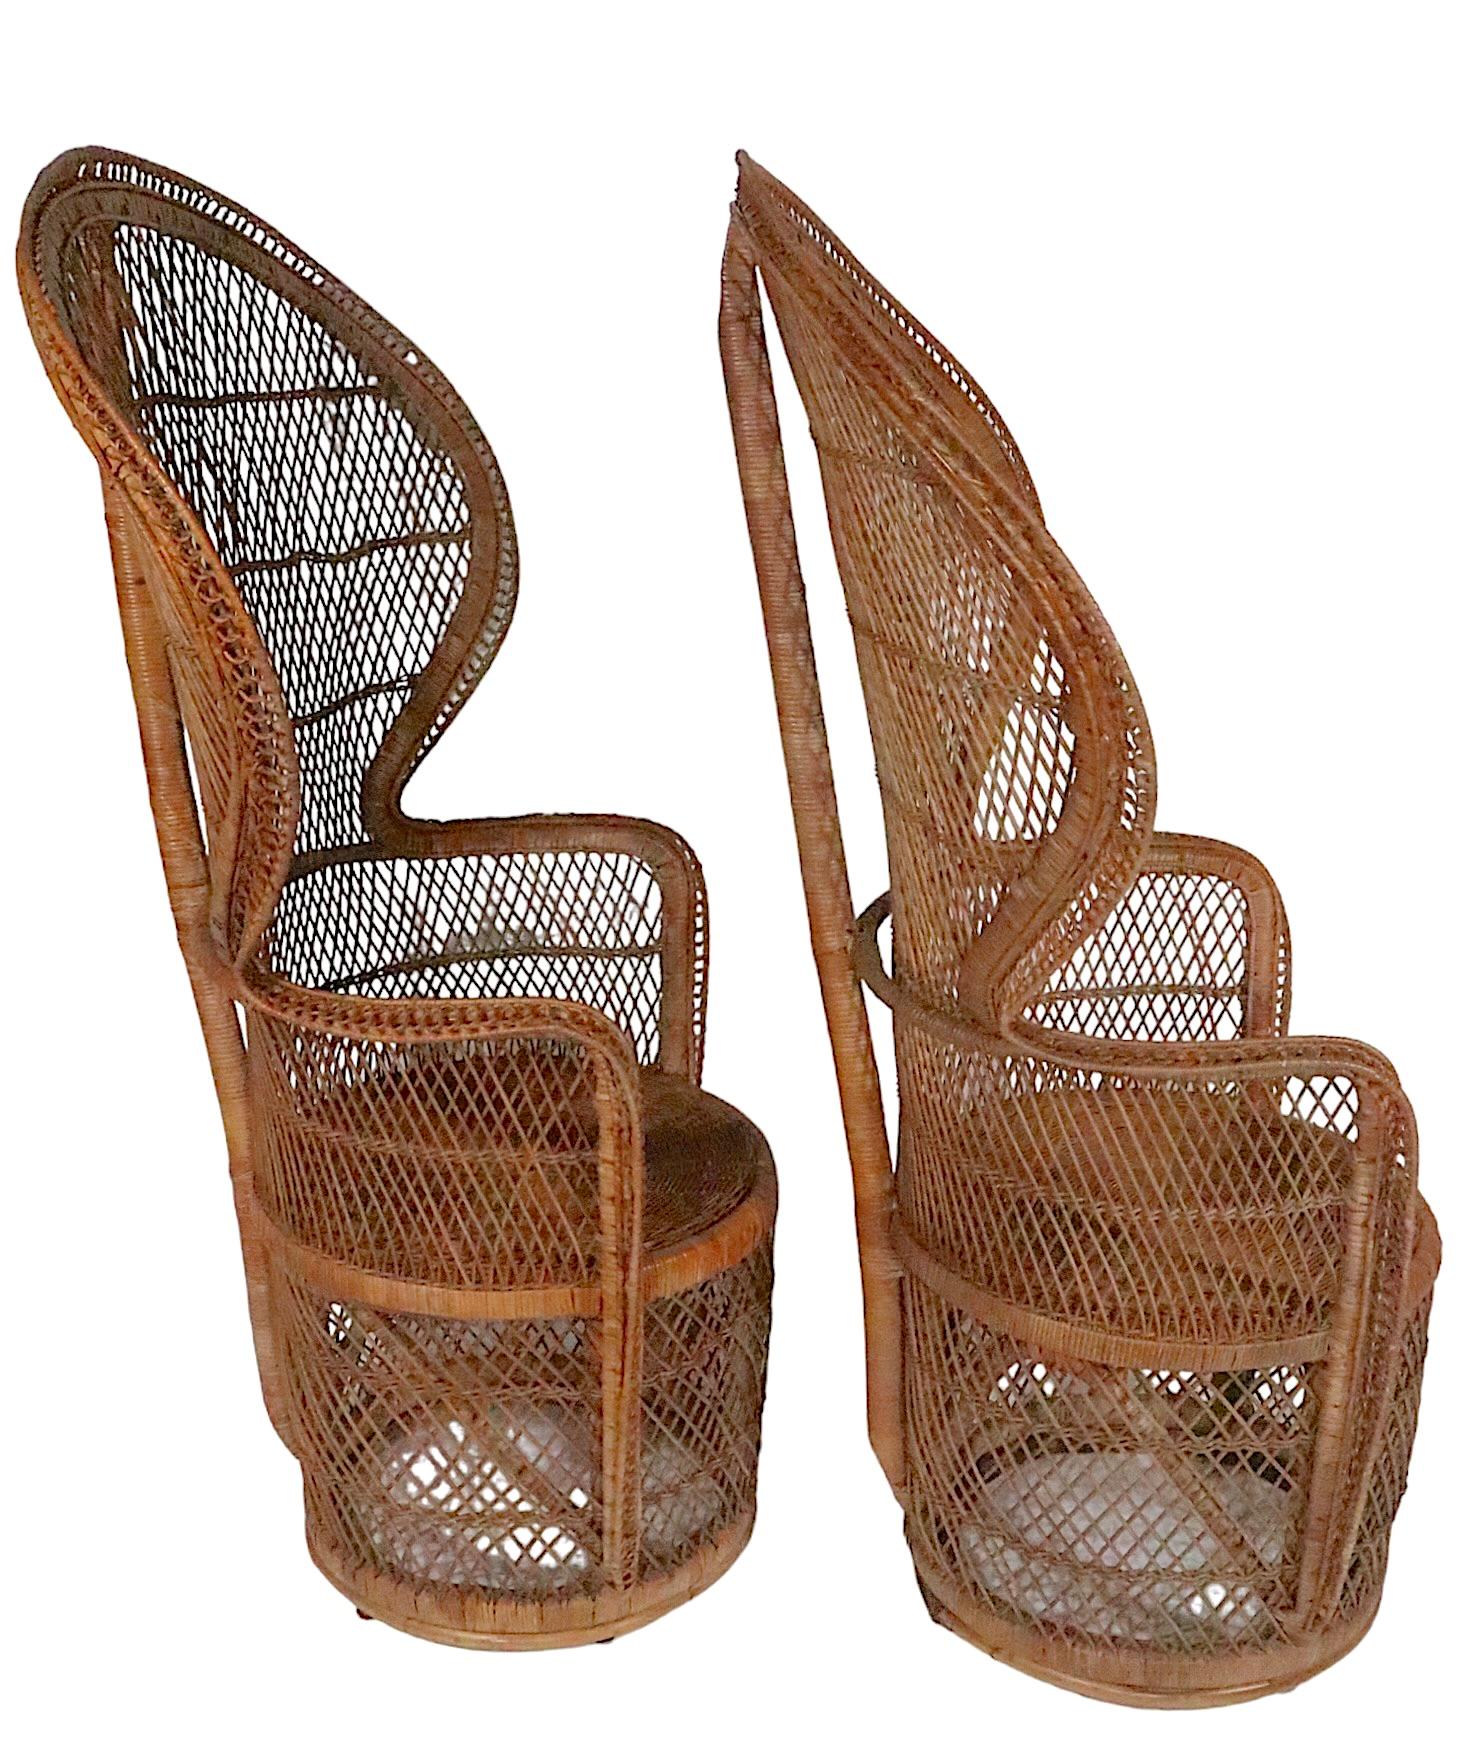 Pr. Vintage Emanuelle Peacock Woven Wicker  Chairs c. 1970's For Sale 3